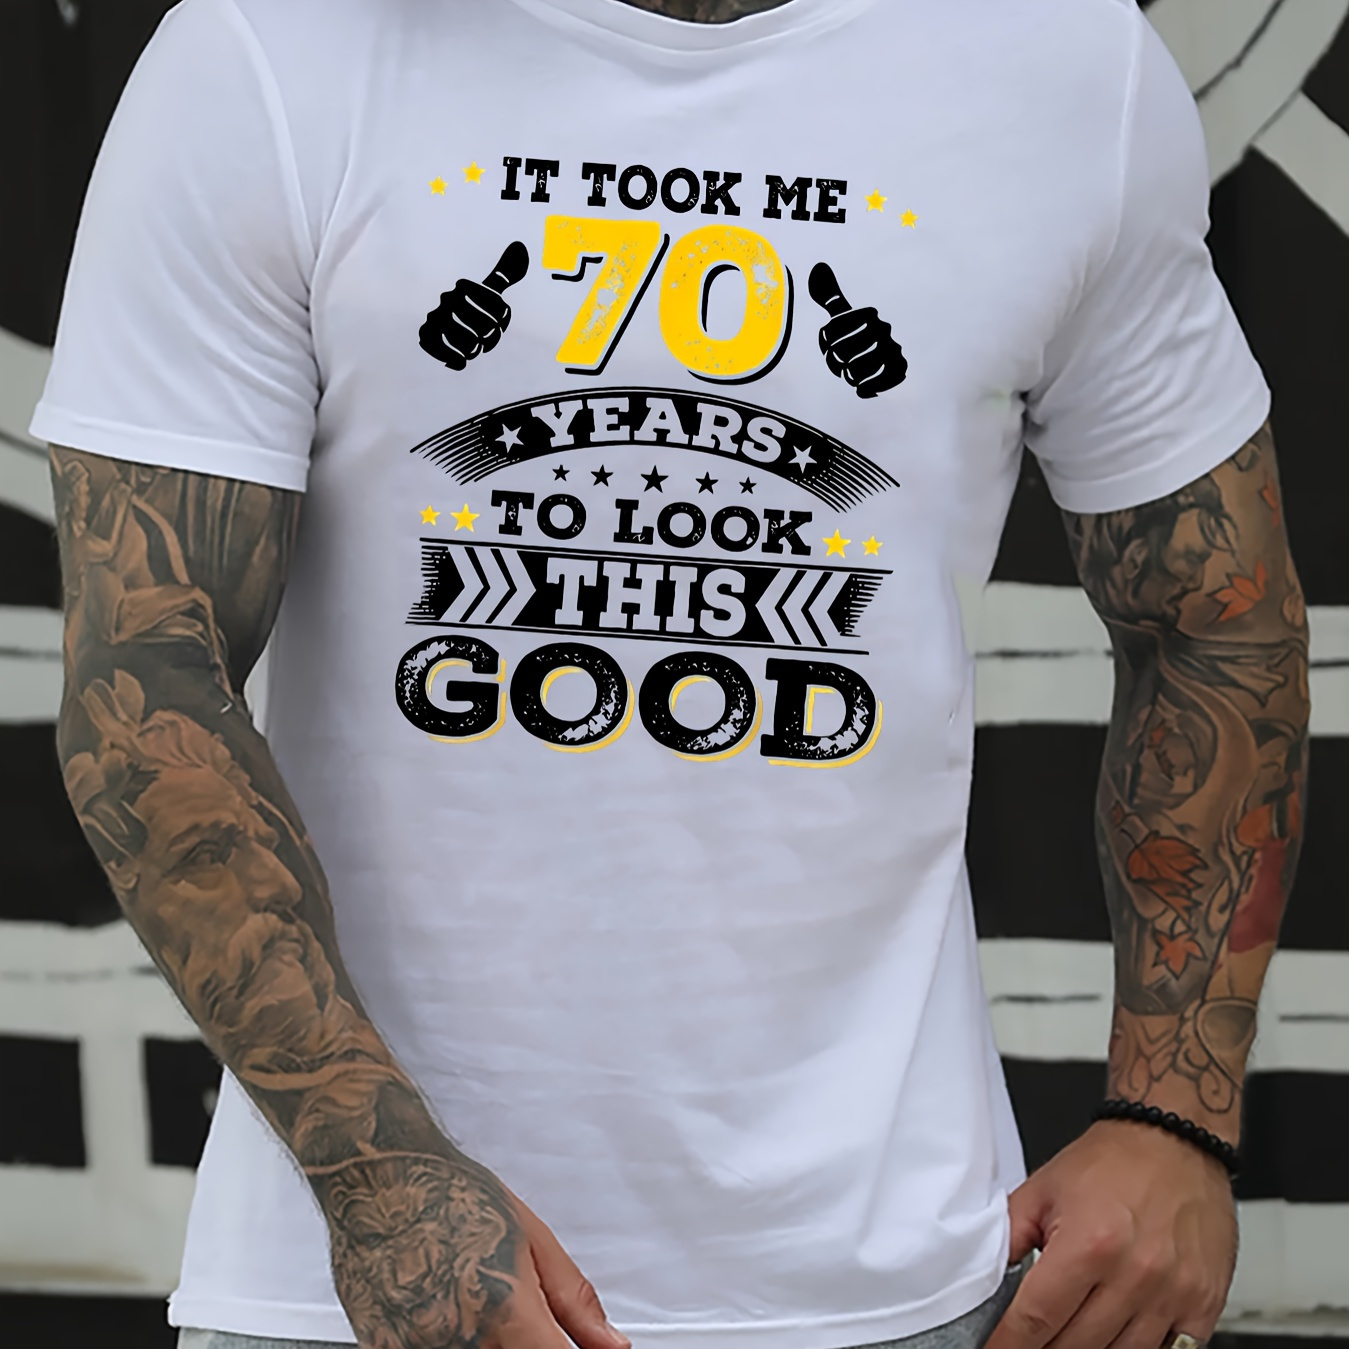 

It Took Me 70 Years To Look This Good Letter Graphic Print Men's Creative Top, Casual Short Sleeve Crew Neck T-shirt, Men's Clothing For Summer Outdoor